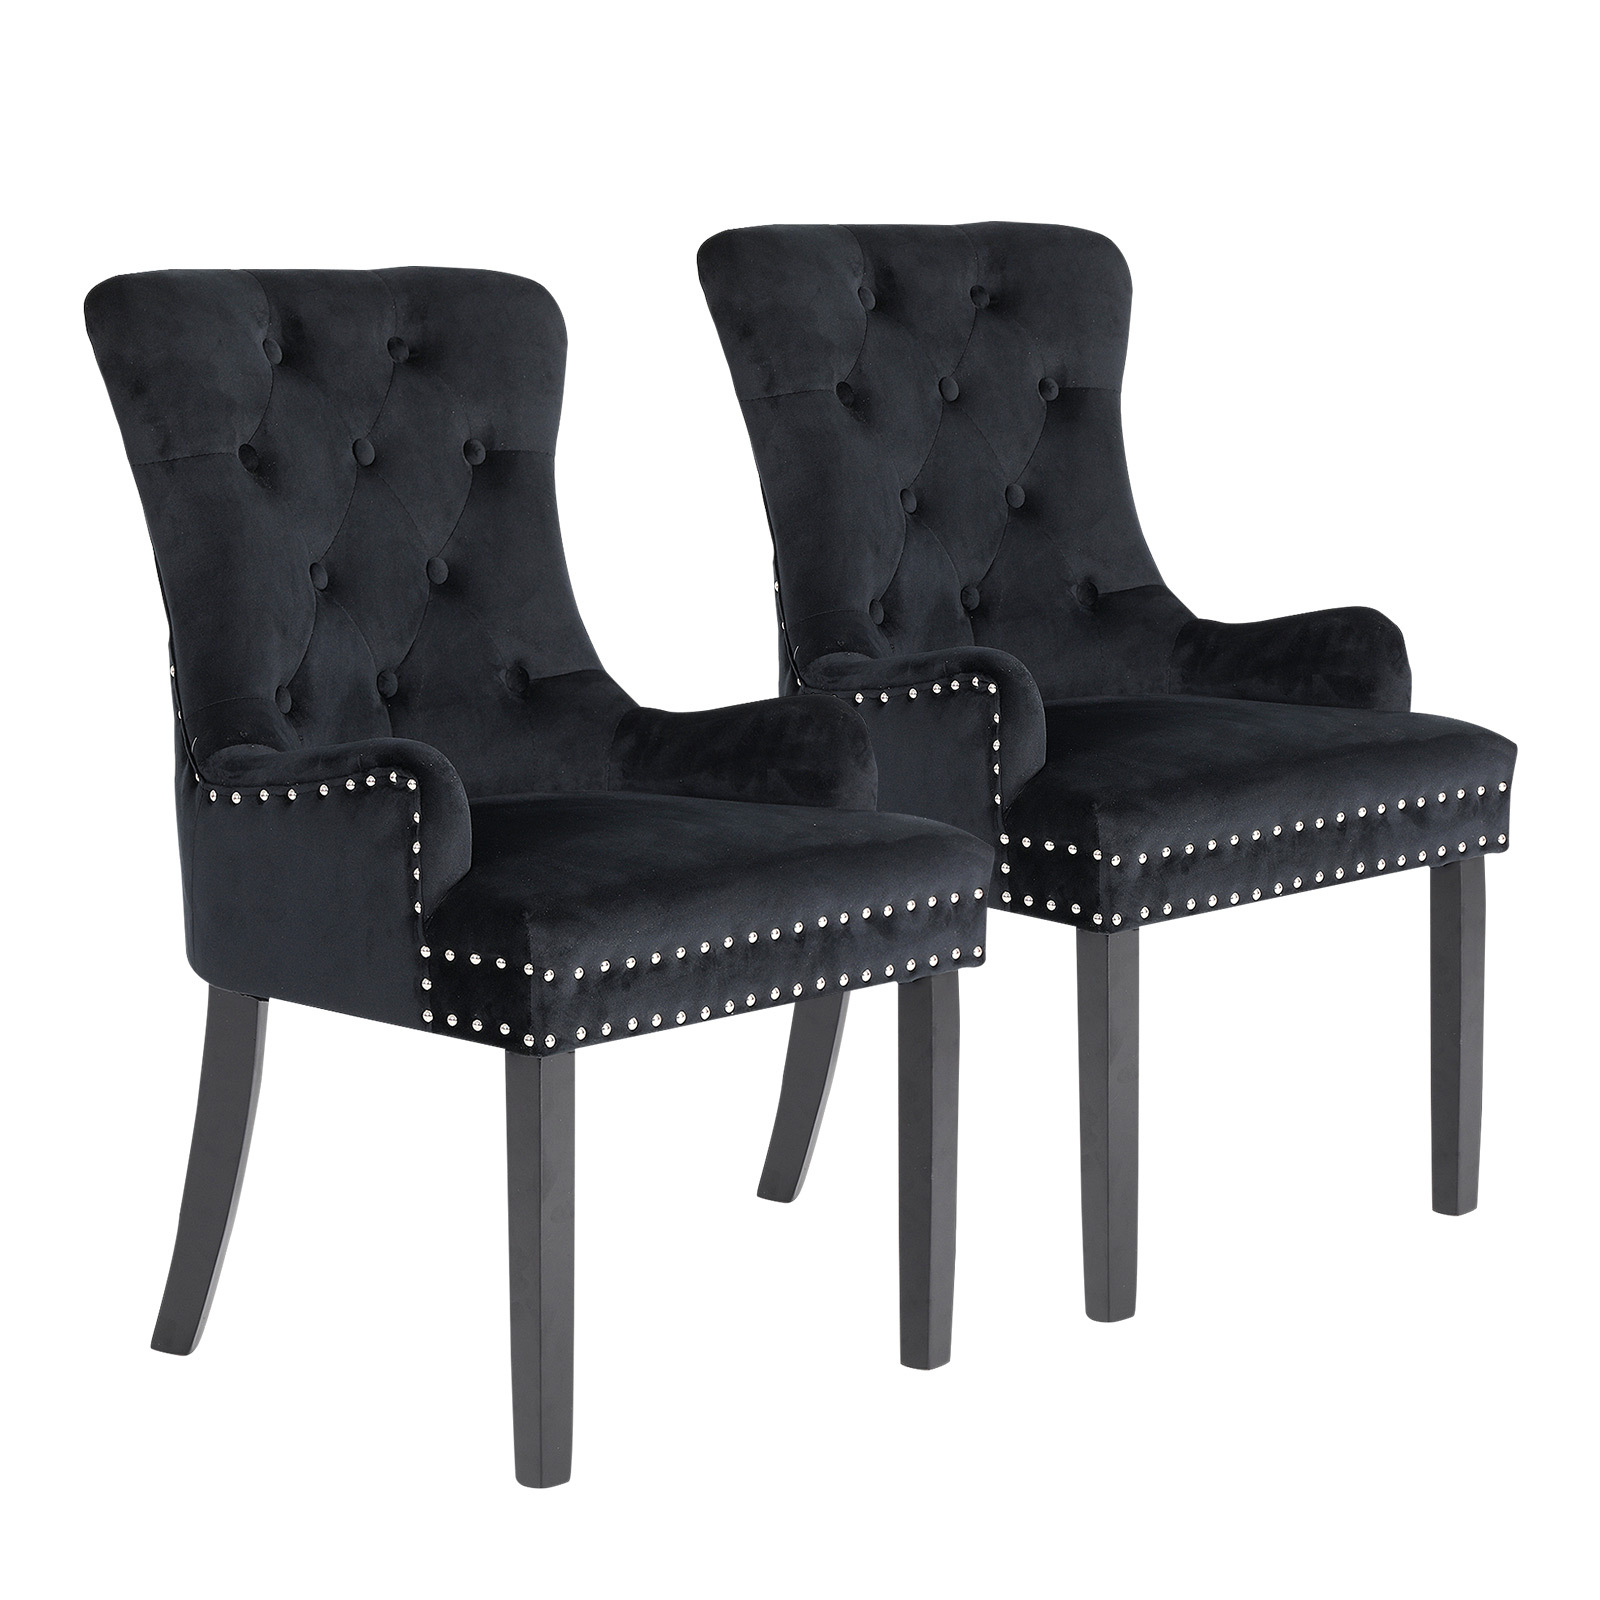 2X French Provincial Velvet with Ring Chair LISSE - BLACK